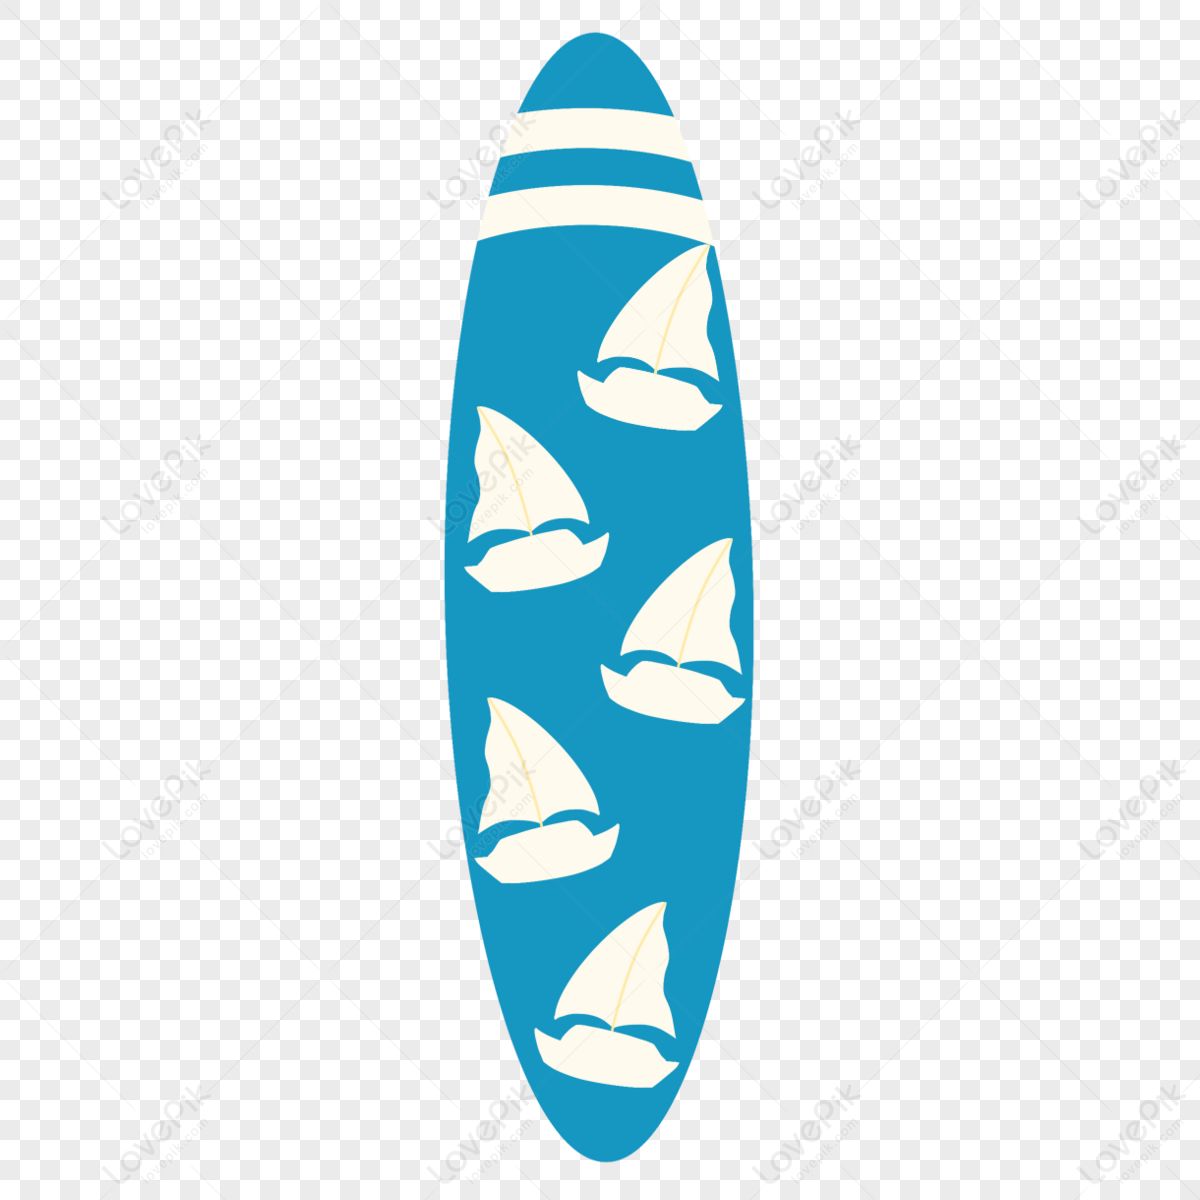 Yacht Surfboard clip art,ocean,white,simple png image free download